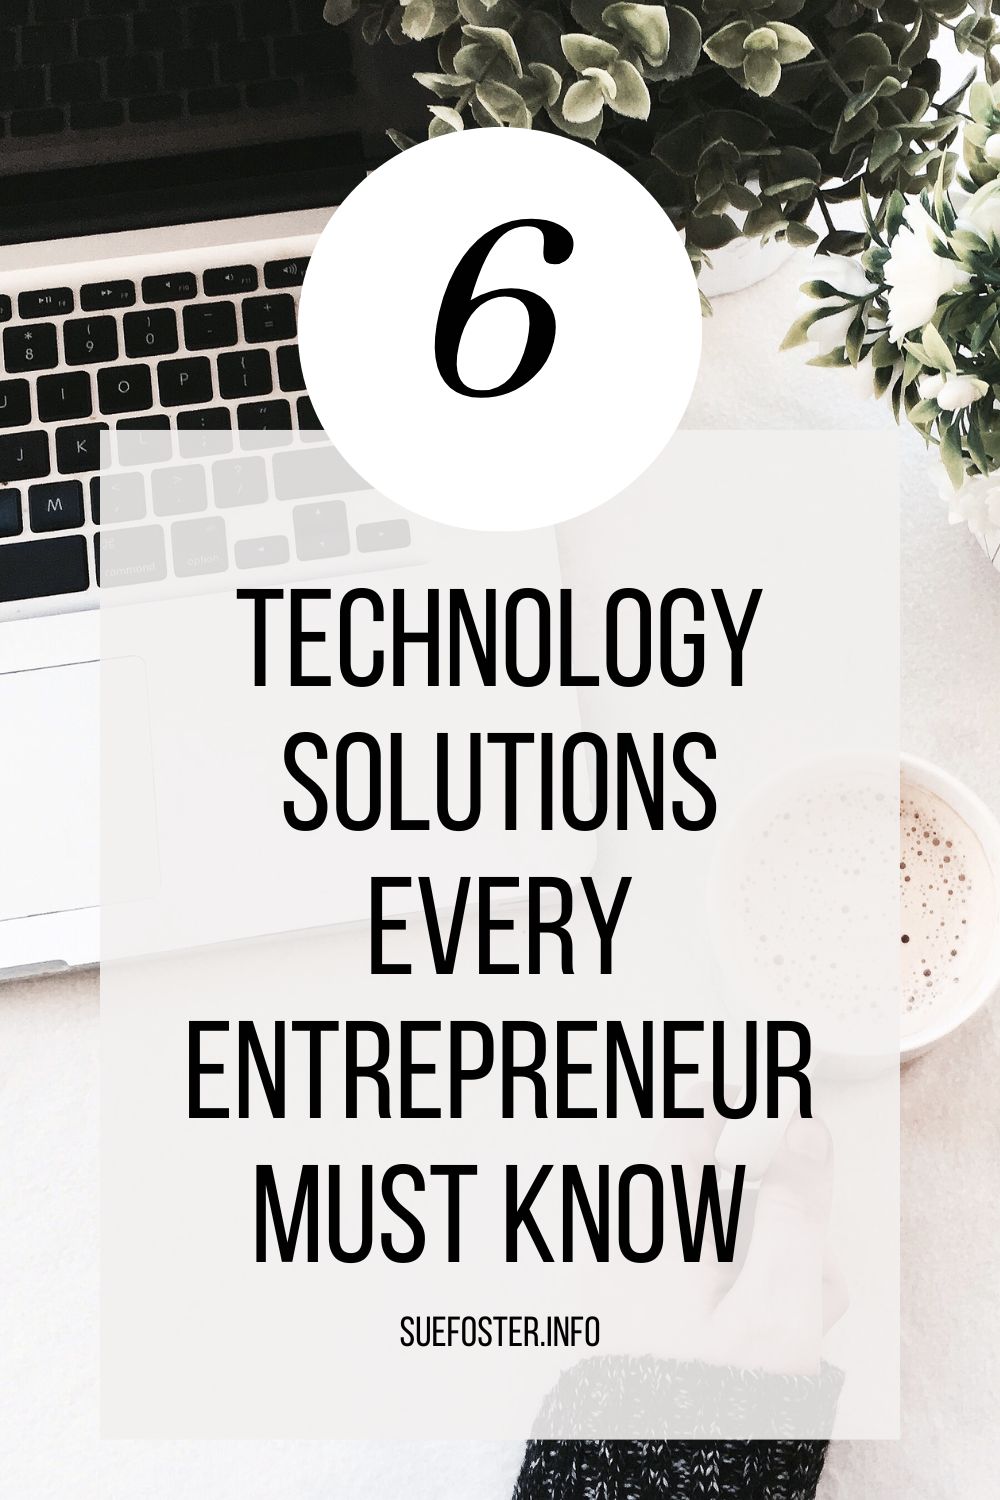 Staying up-to-date with the latest technology trends is one way to give your business a competitive edge. Here are six technology solutions you must know.